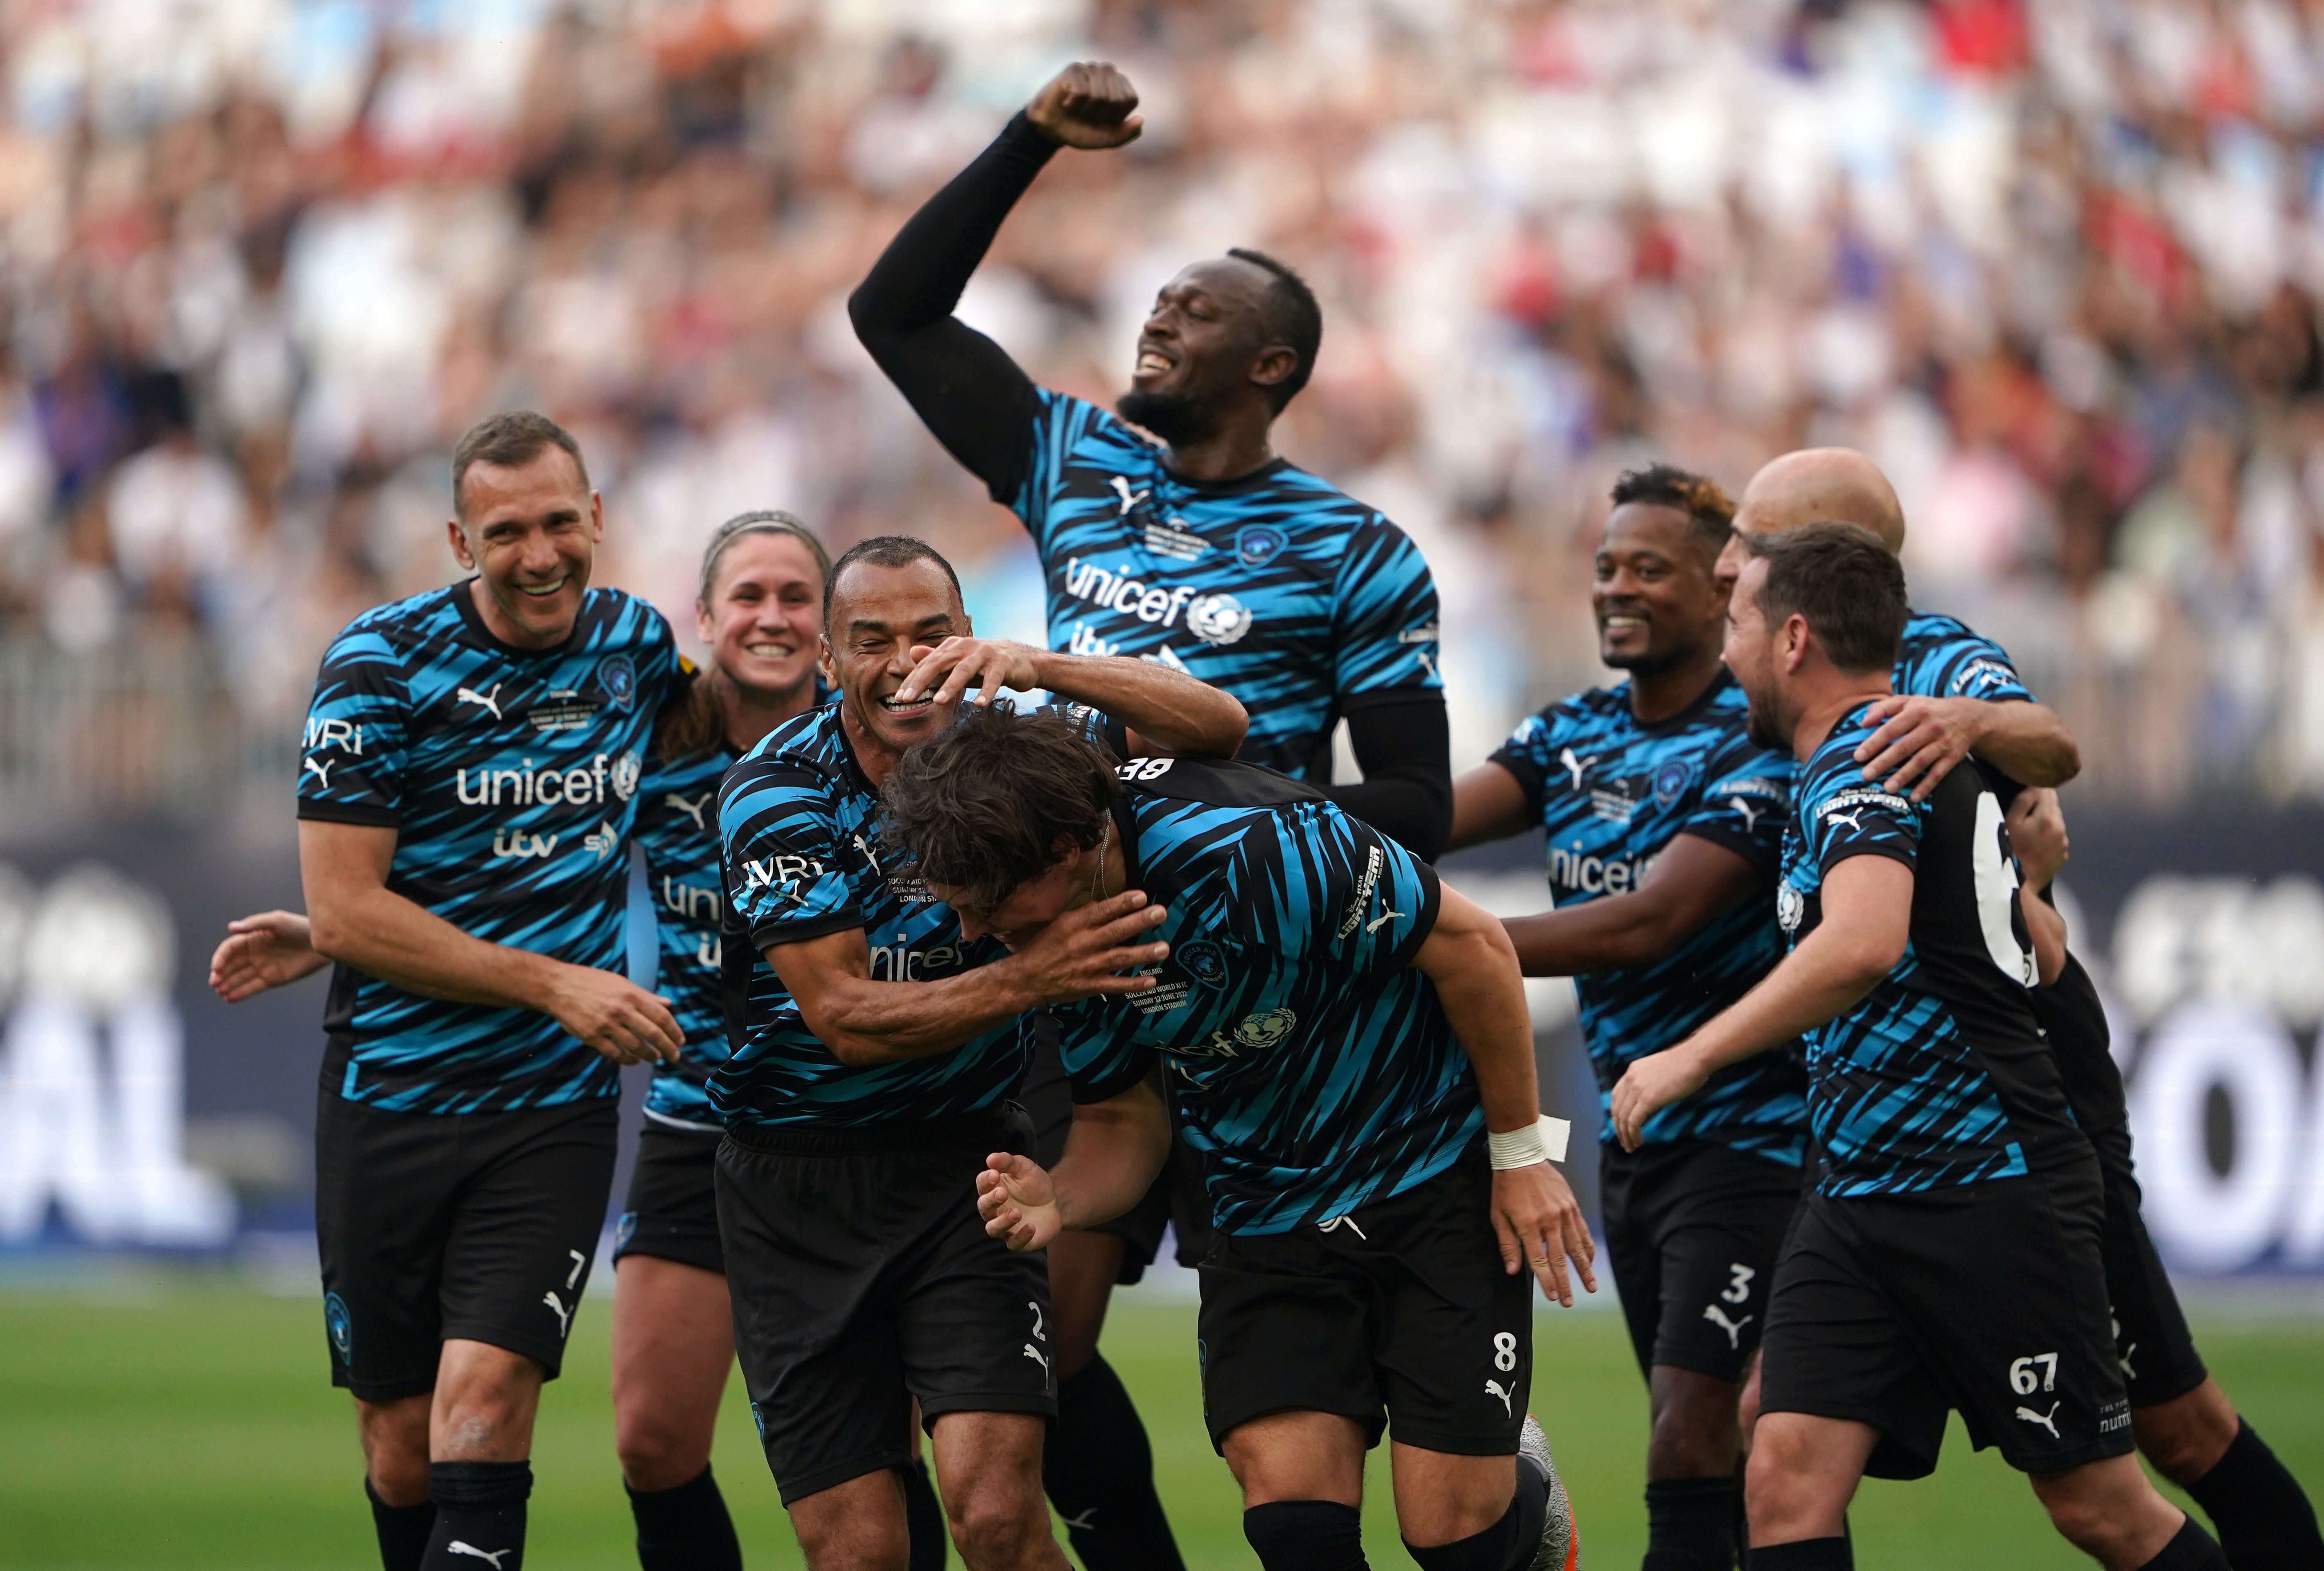 Soccer Aid 2022 World XI defeat England in charity match for Unicef